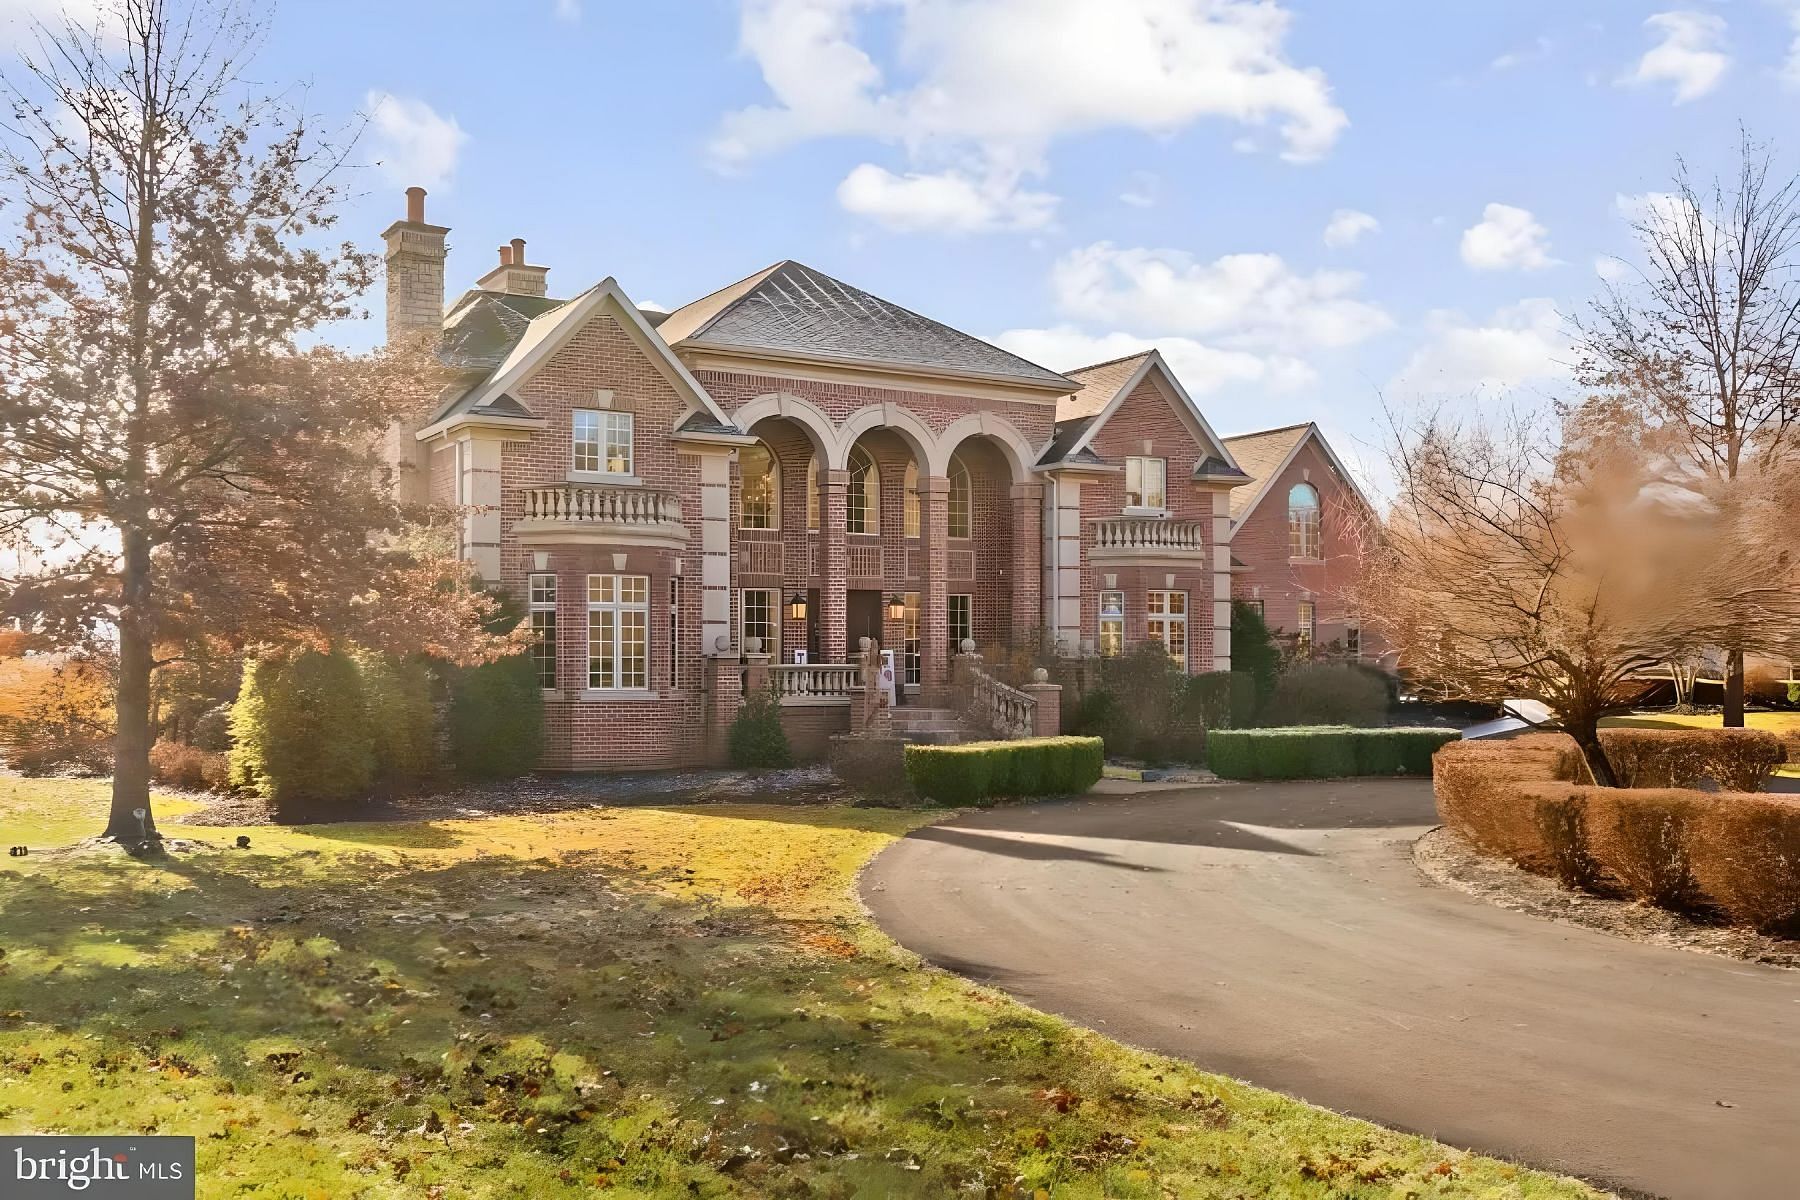 Former White Sox player Jimmy Galusky selling $3,000,000 Bridgeport mansion that boasts enchanting in-ground pool and jacuzzi haven